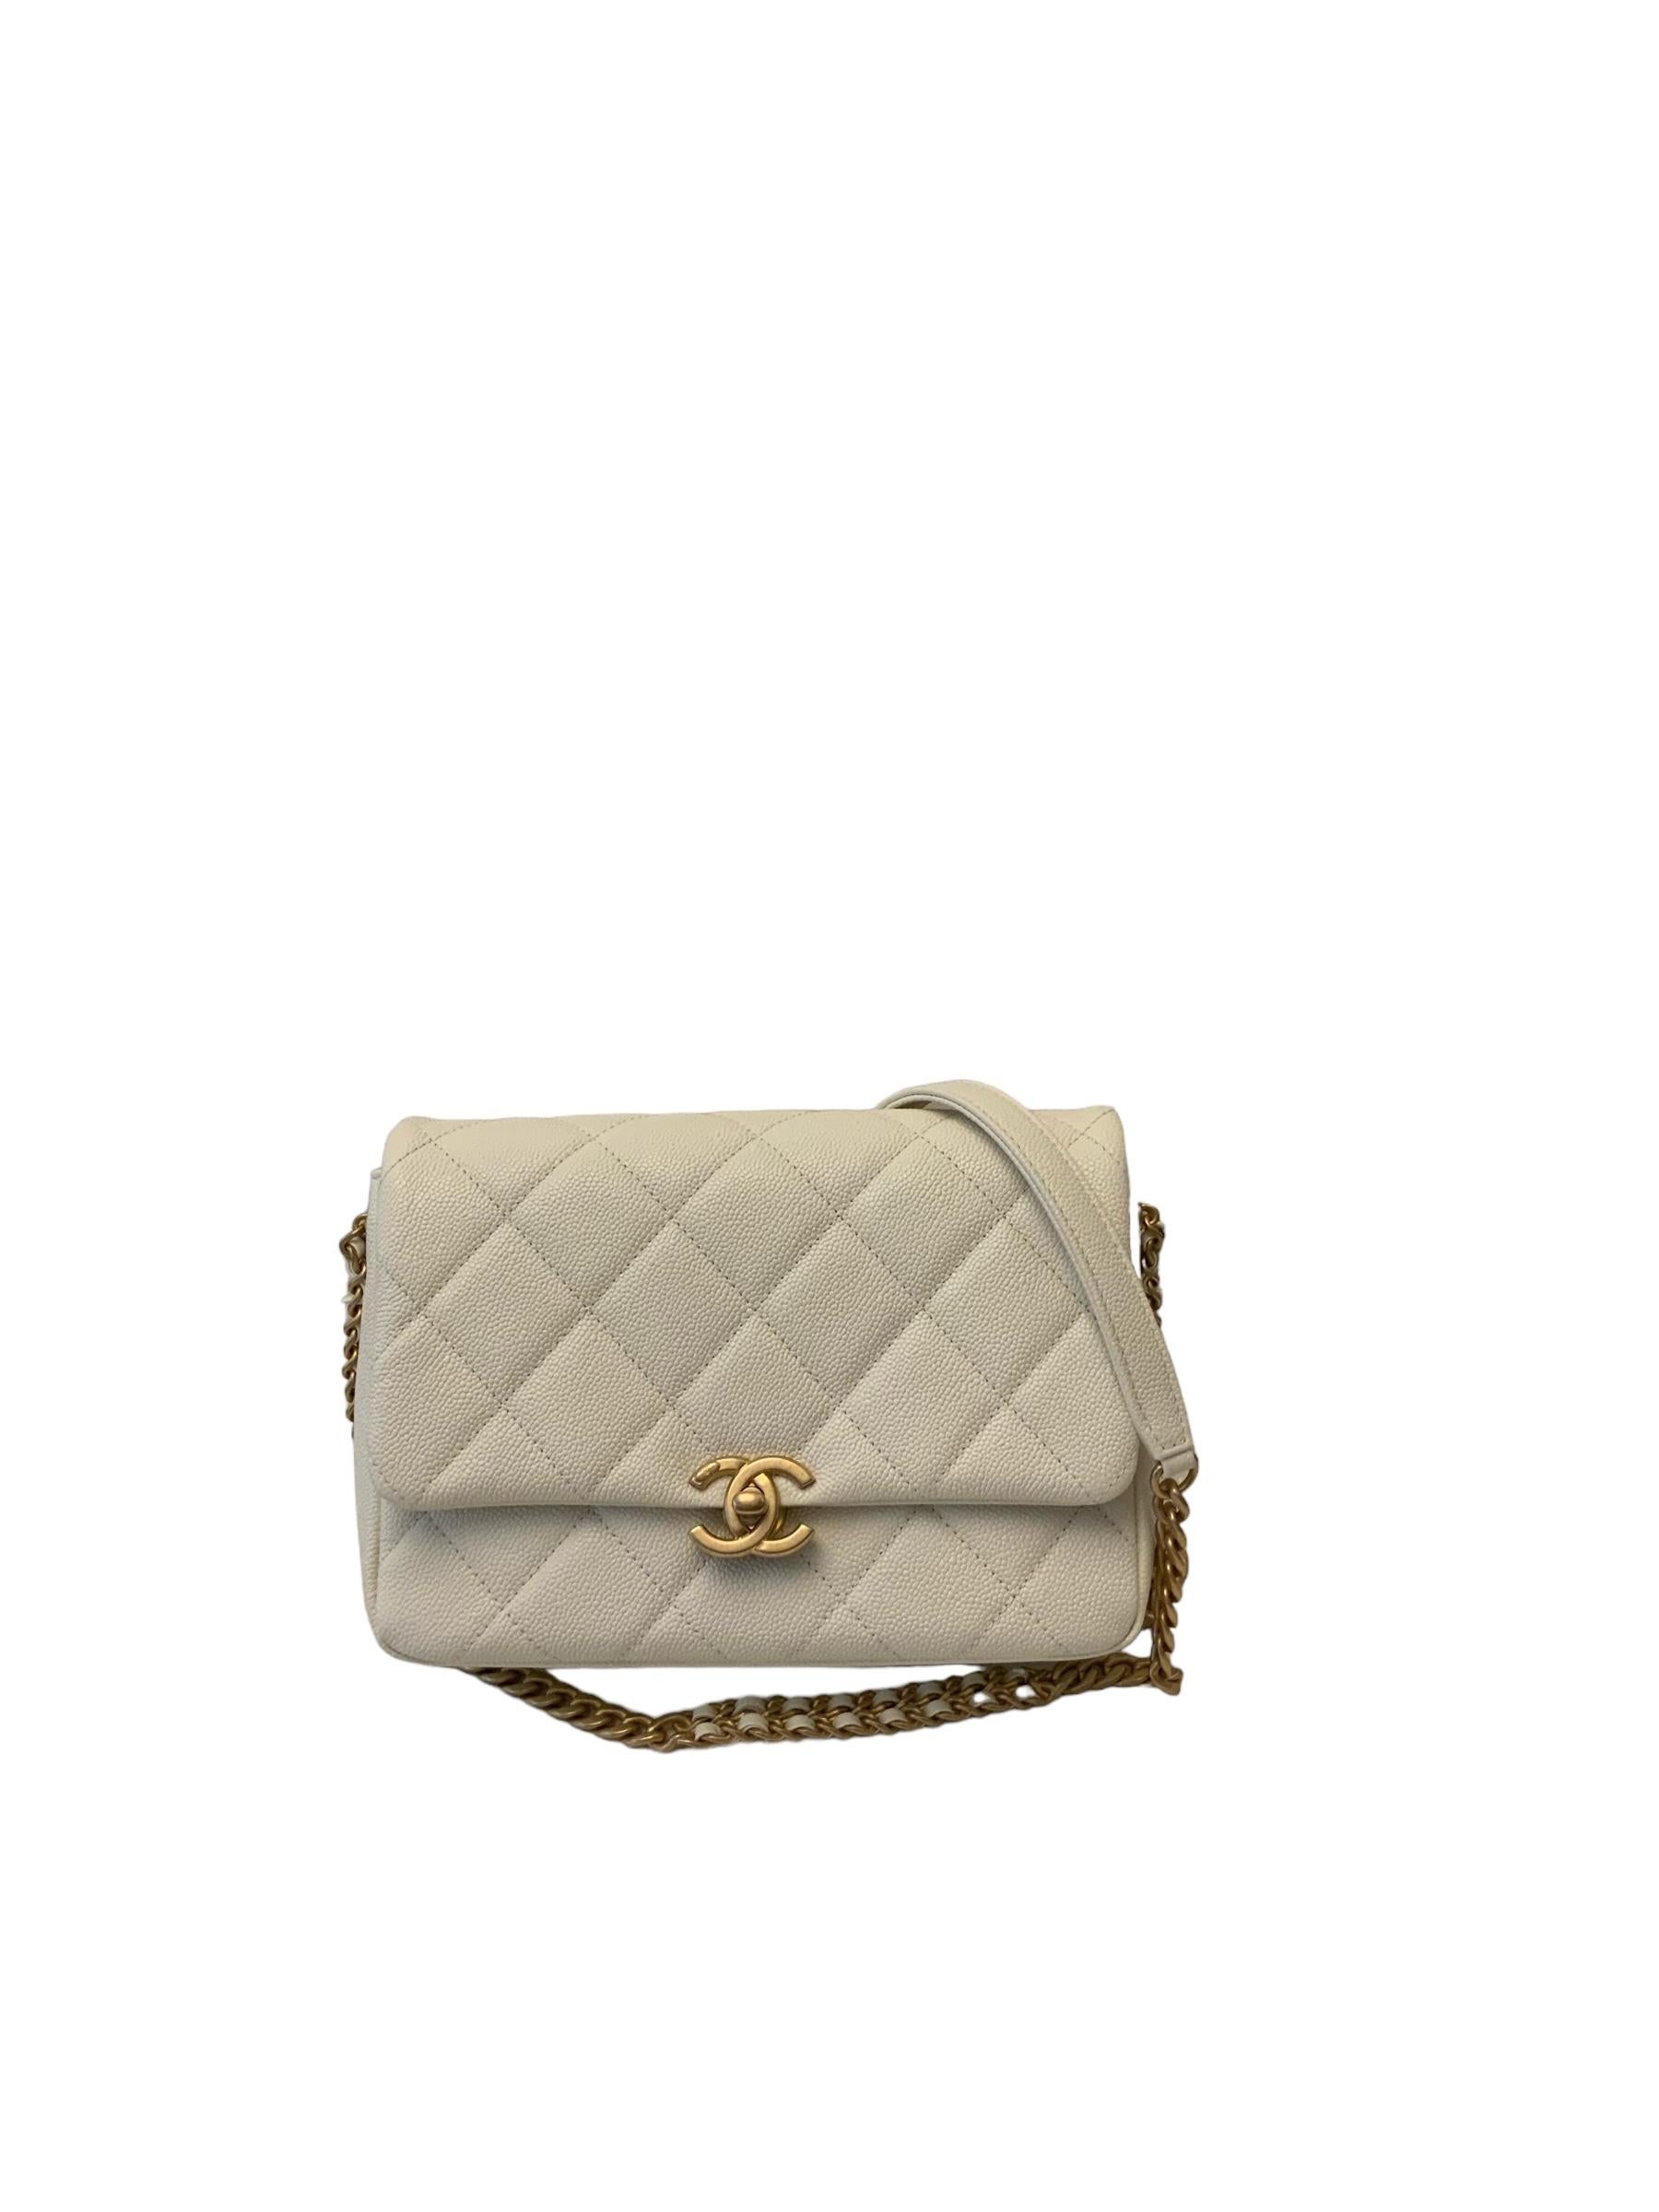 Chanel 22P Melody Flap White Caviar Small Bag  For Sale 6